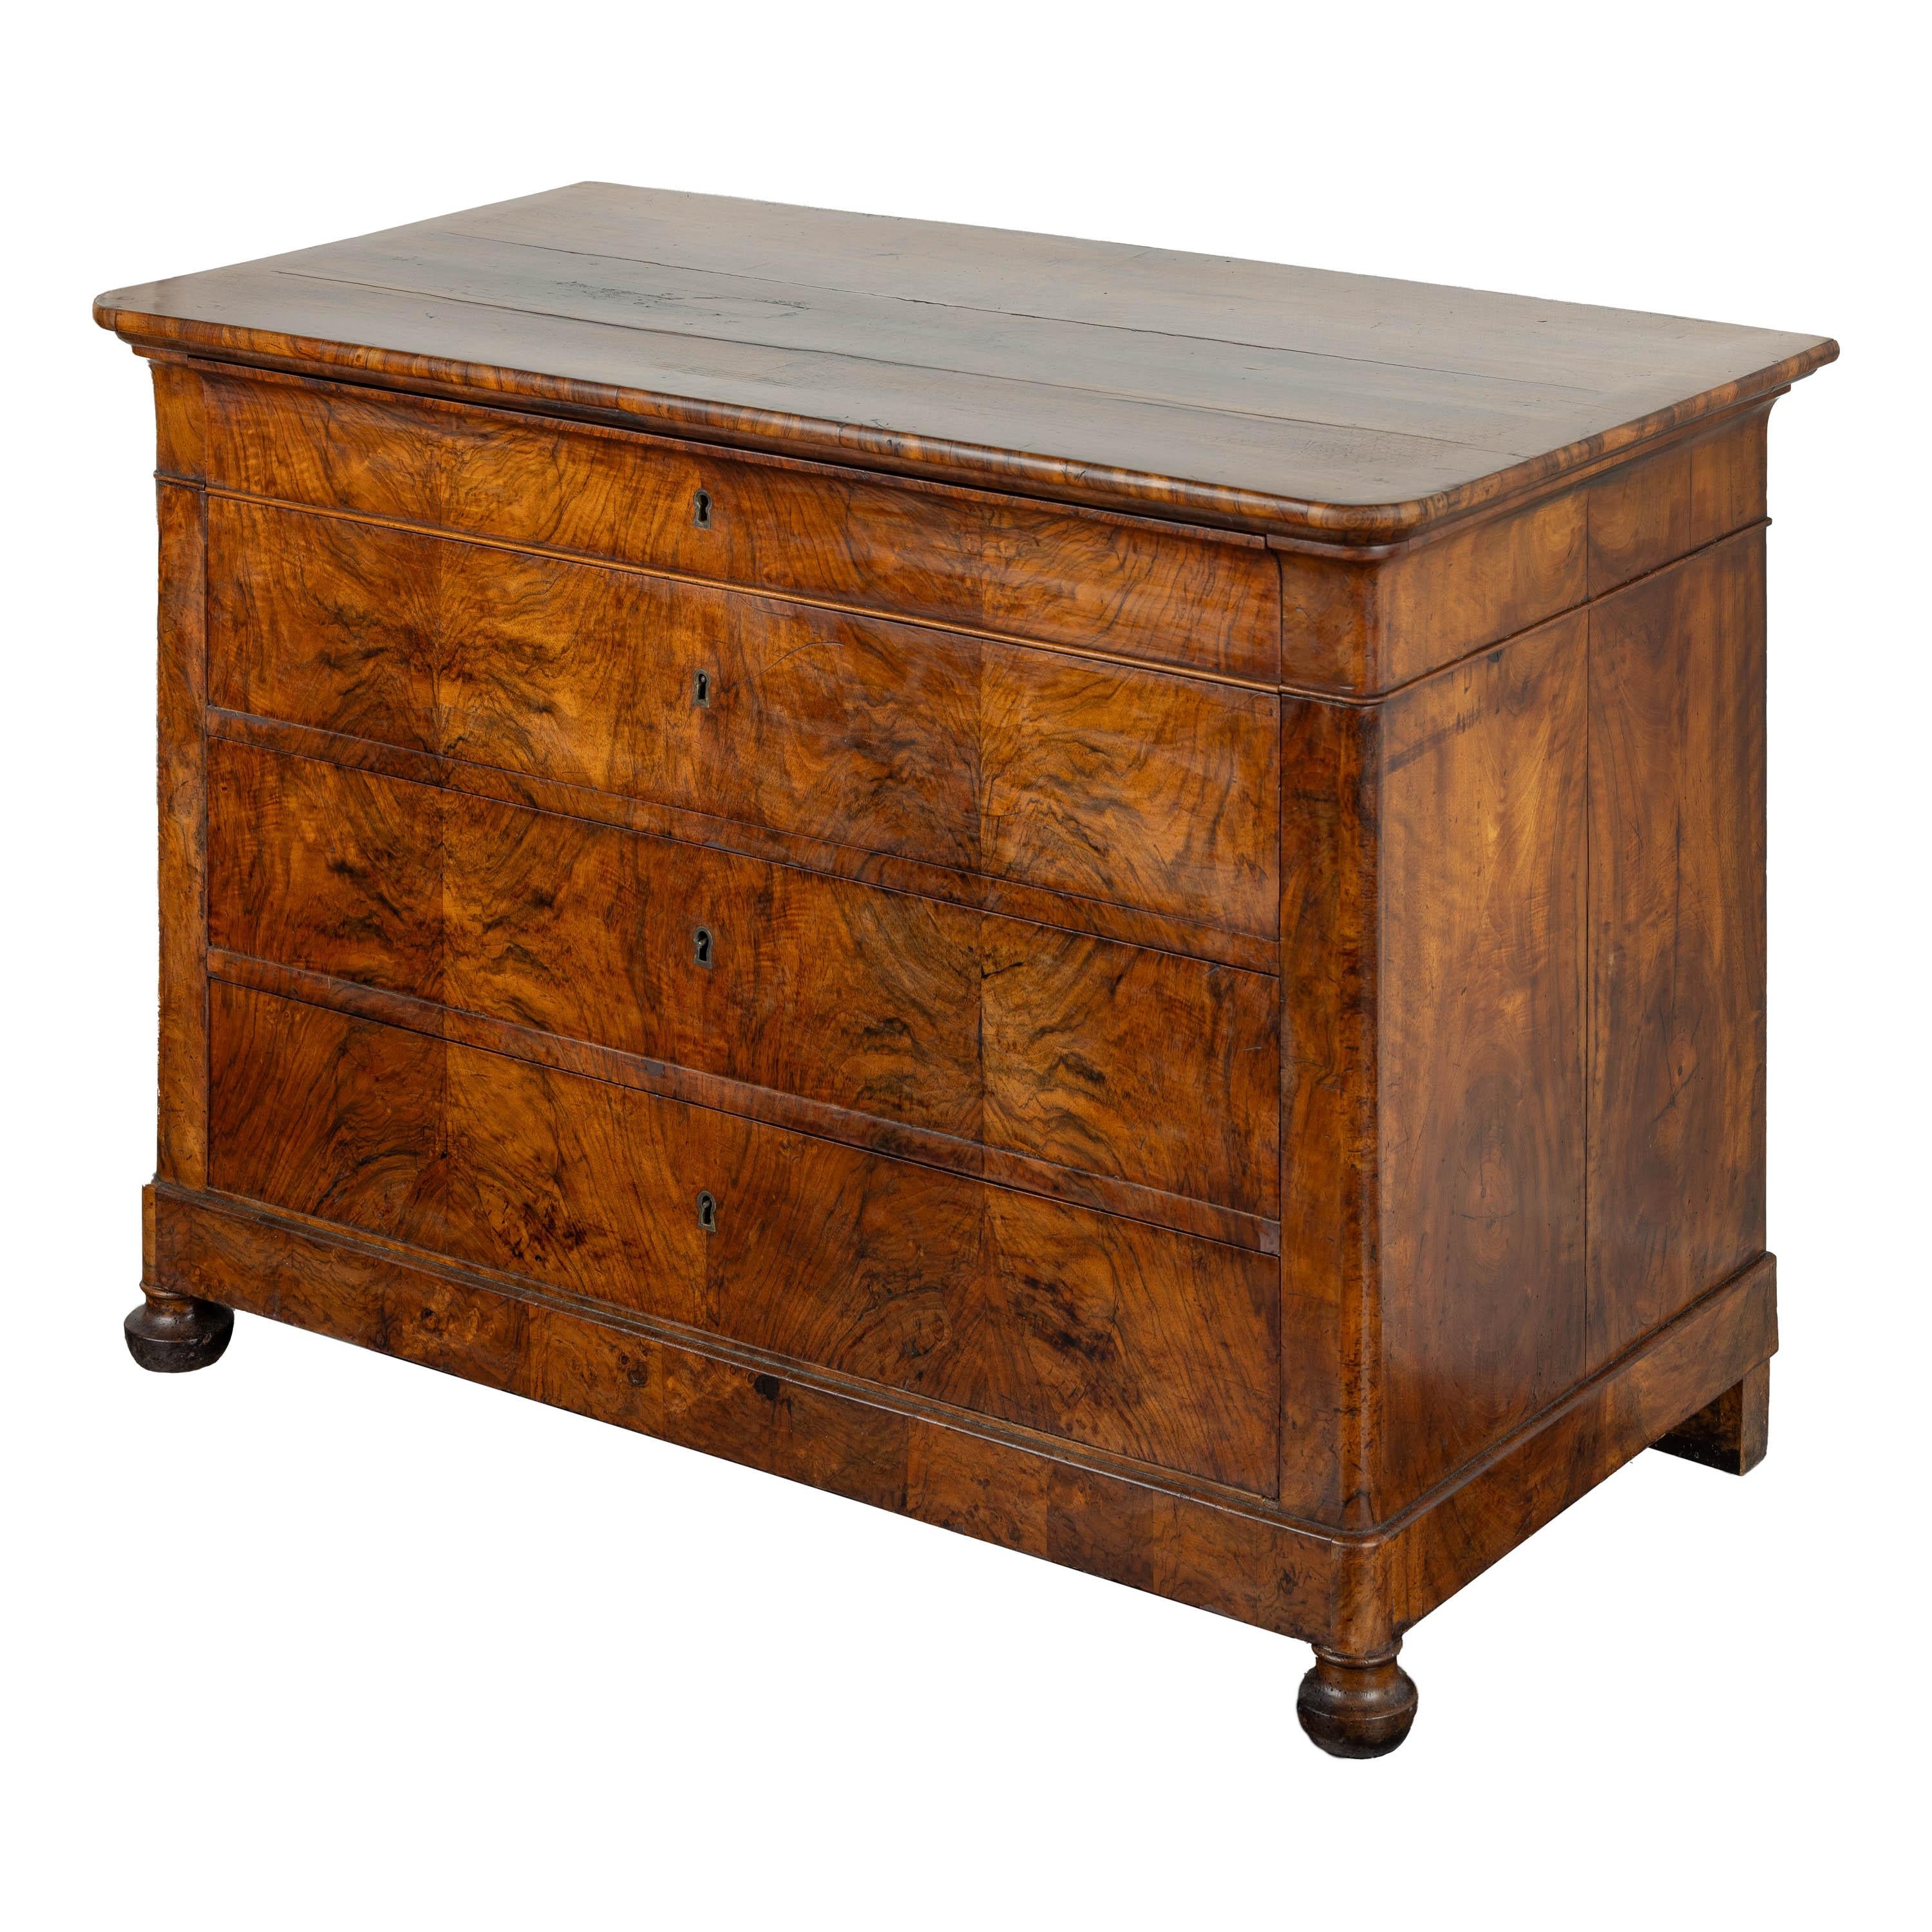 Louis Philippe Chest ca 1850’s. Beautiful details abound in the book matched walnut veneer commode. Pieces of this period rarely have solid planked wood top. 
All drawers glide and are accessed with the original key. Top hidden drawer (no